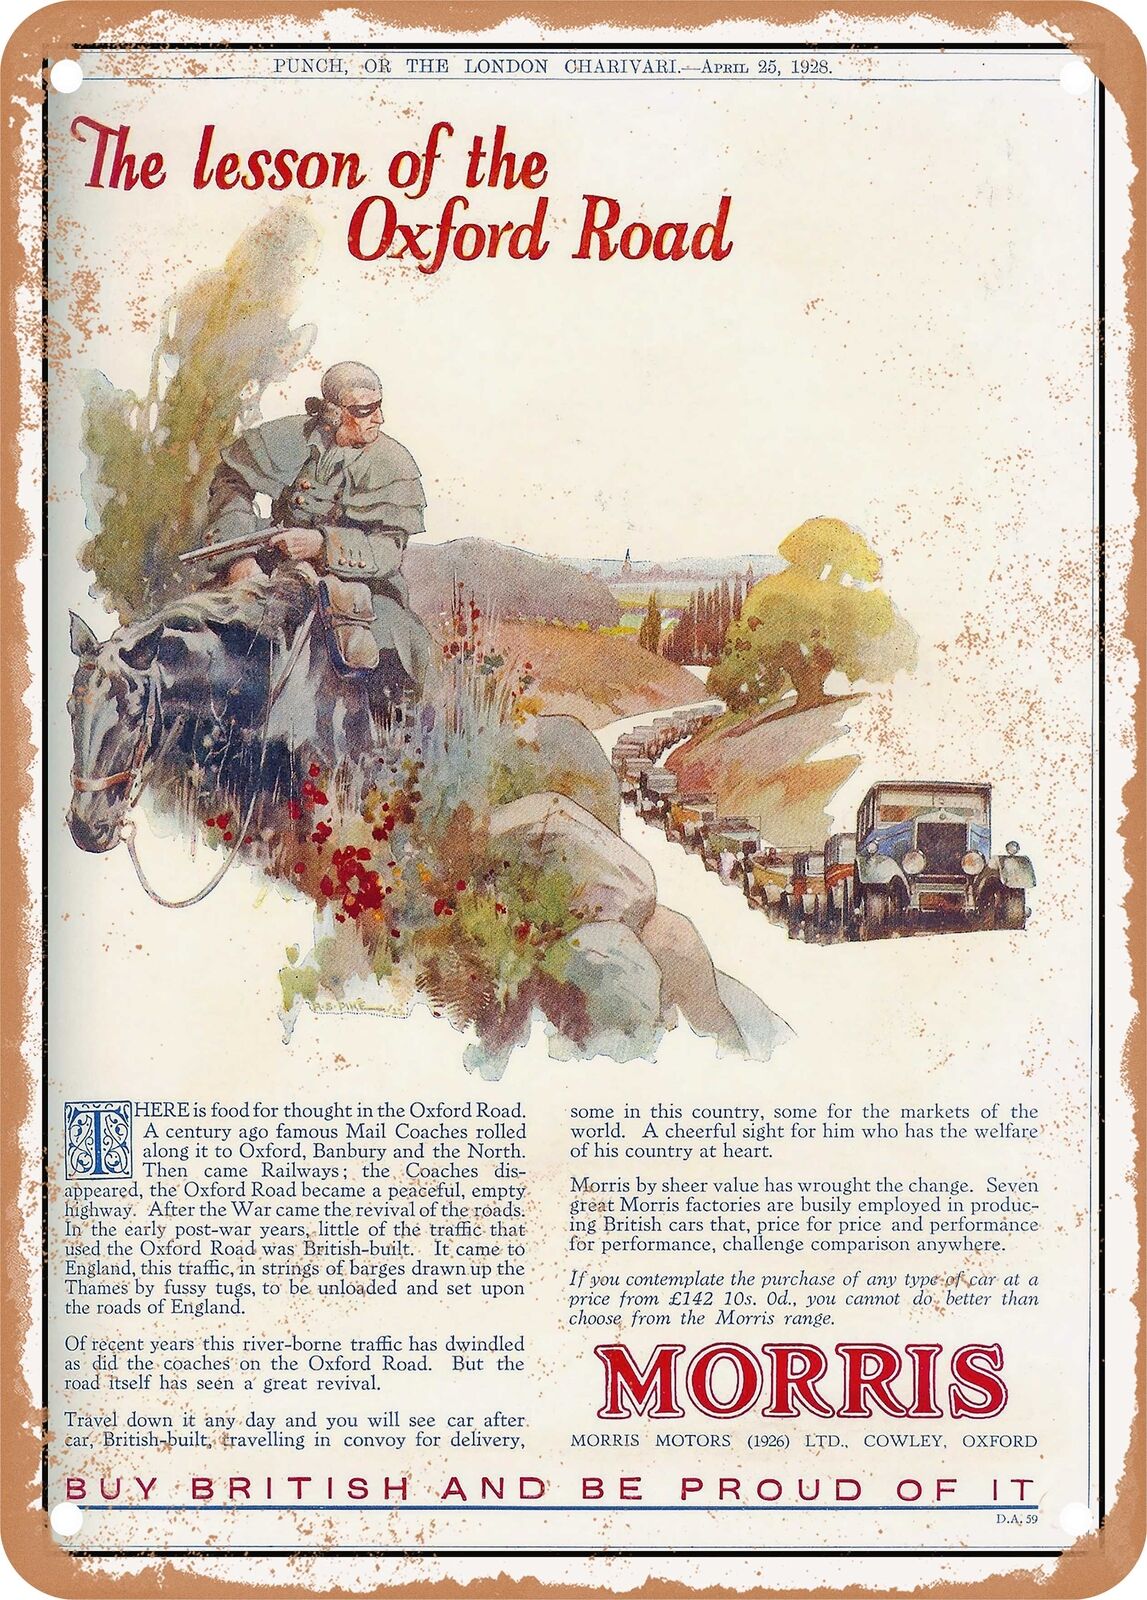 METAL SIGN - 1928 Morris the Lesson of the Oxford Road 2 Vintage Ad